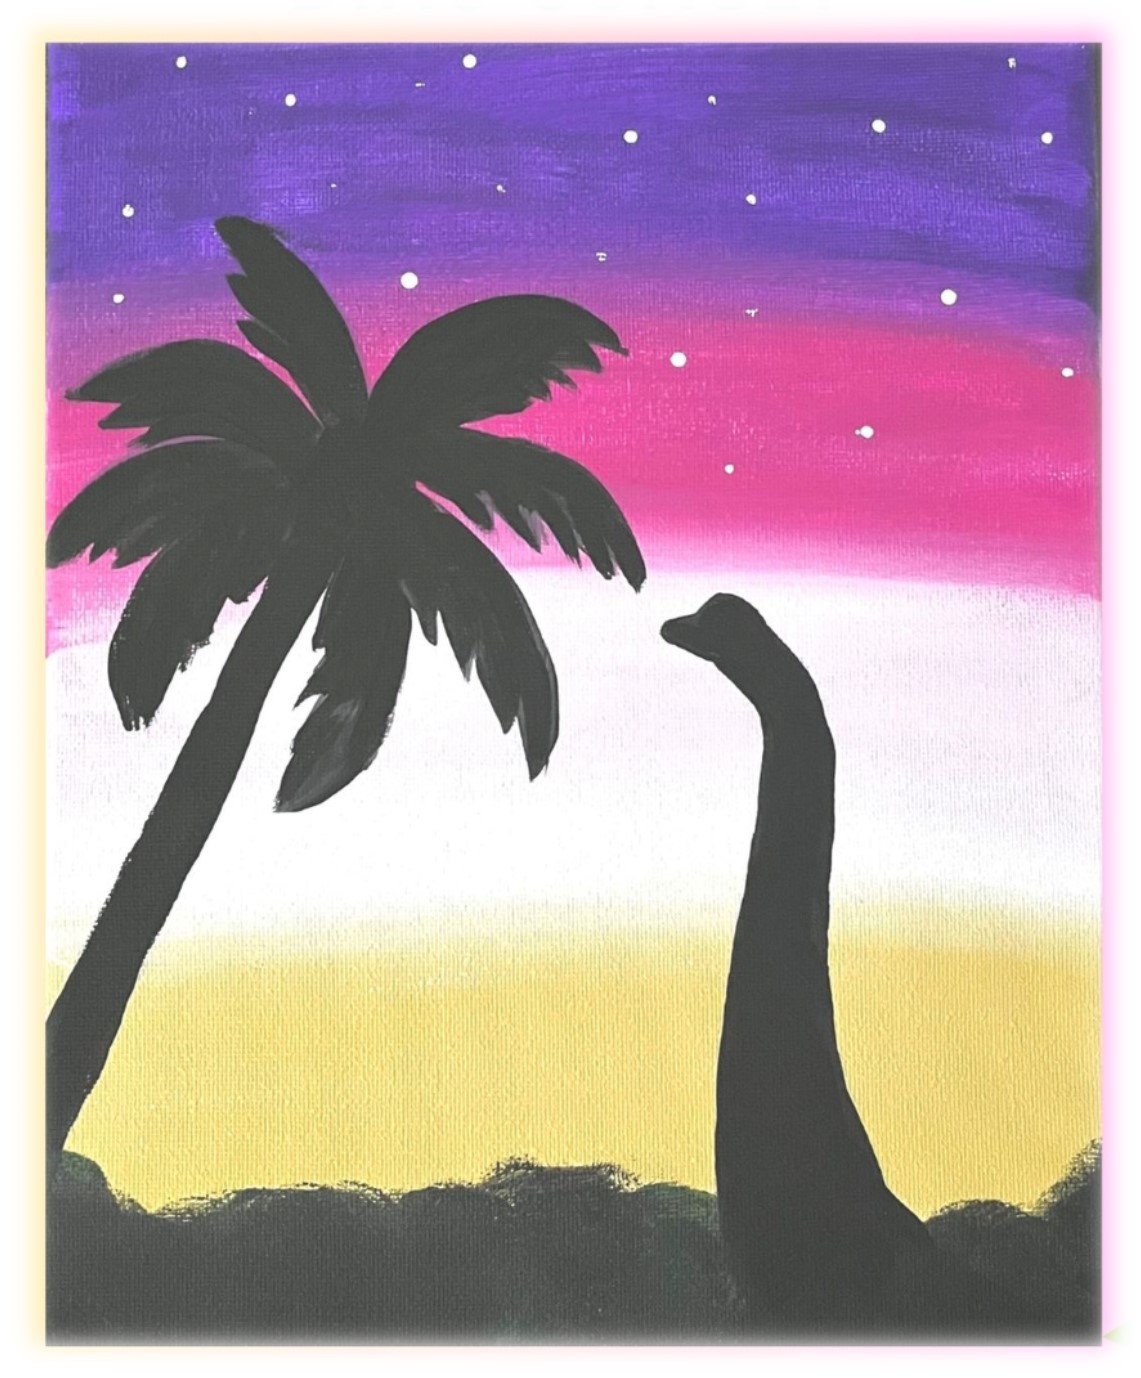 One long necked dinosaur and palm tree in silhouette. Background sunset is purple at the top, with pink, white and yellow bancs of color underneath. 